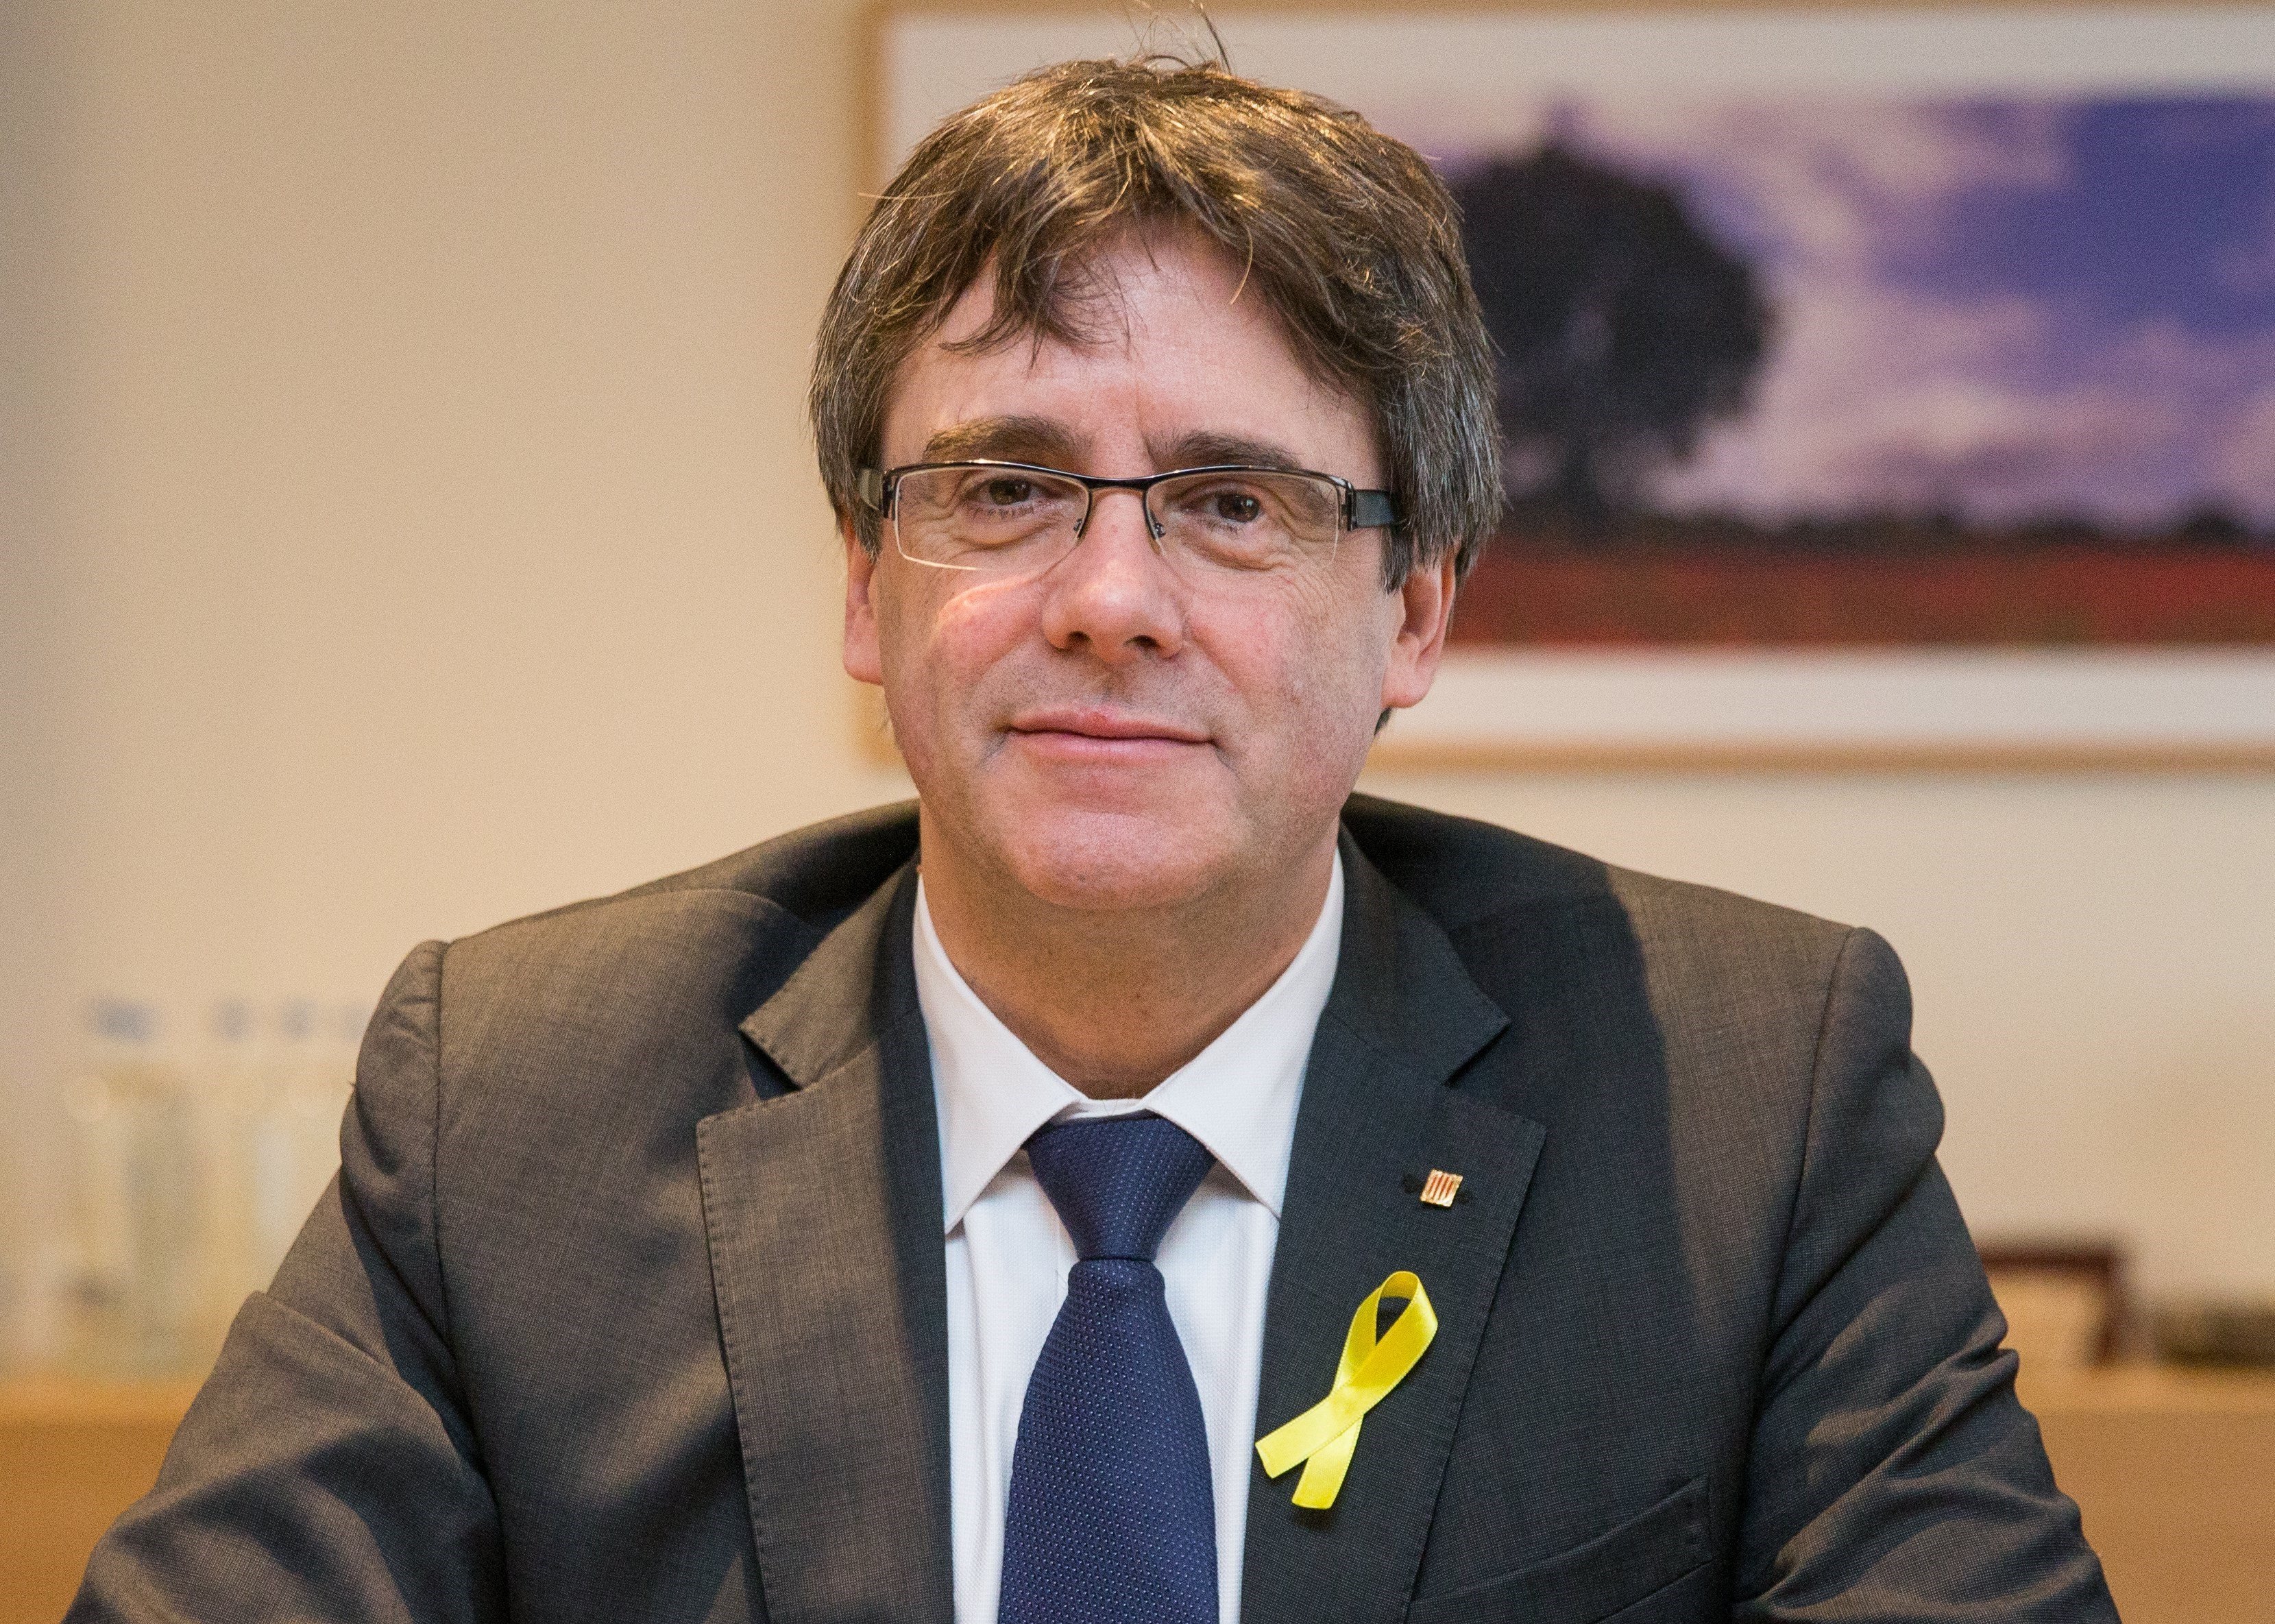 Puigdemont announces he's standing aside provisionally, names Sànchez as alternative